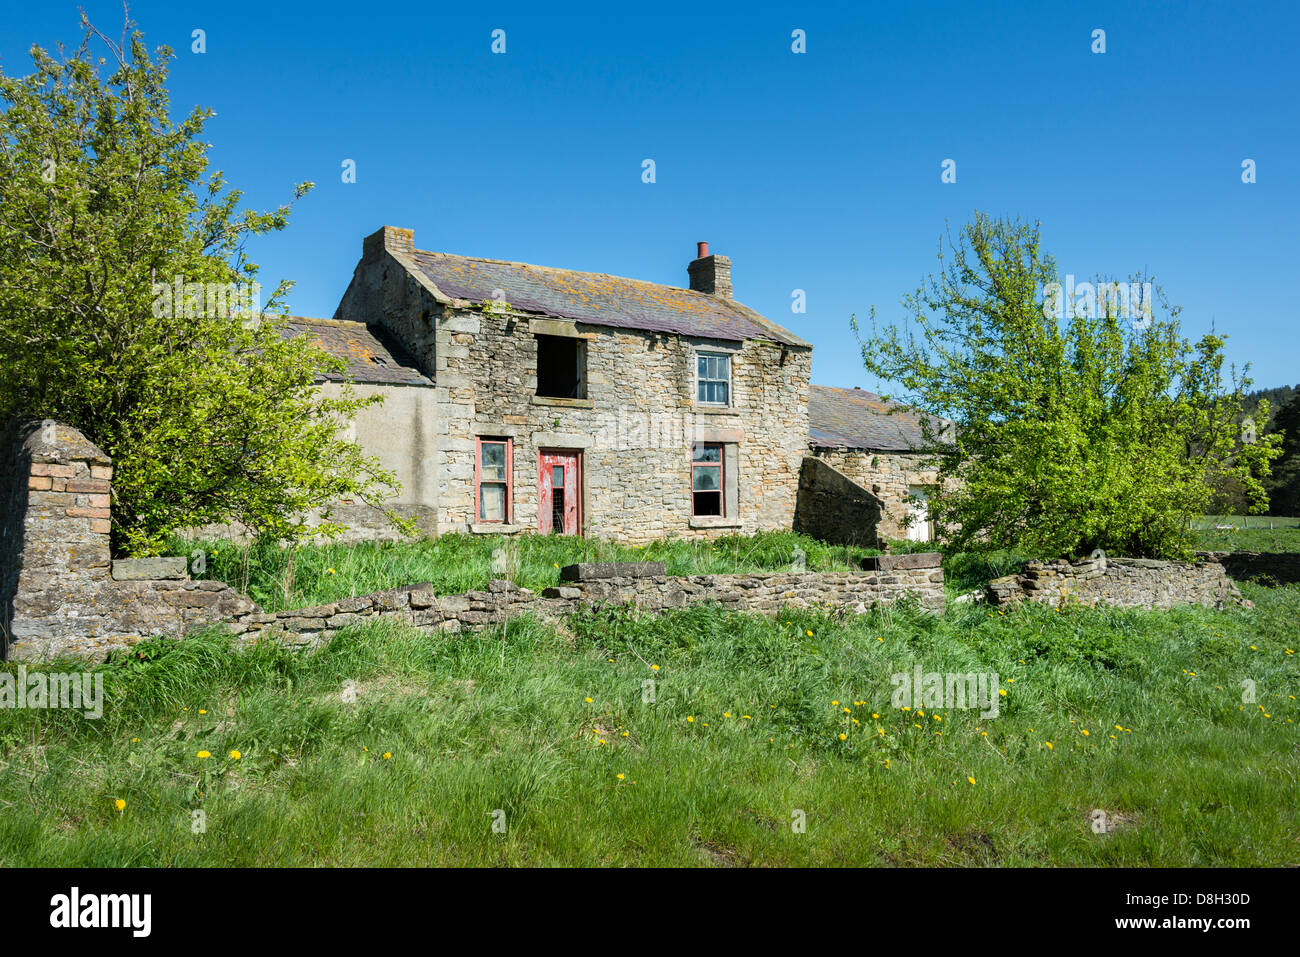 Ruined house - this ruin is of many  abandoned building / cottage / farmhouse  lying derelict in in the English countryside Stock Photo